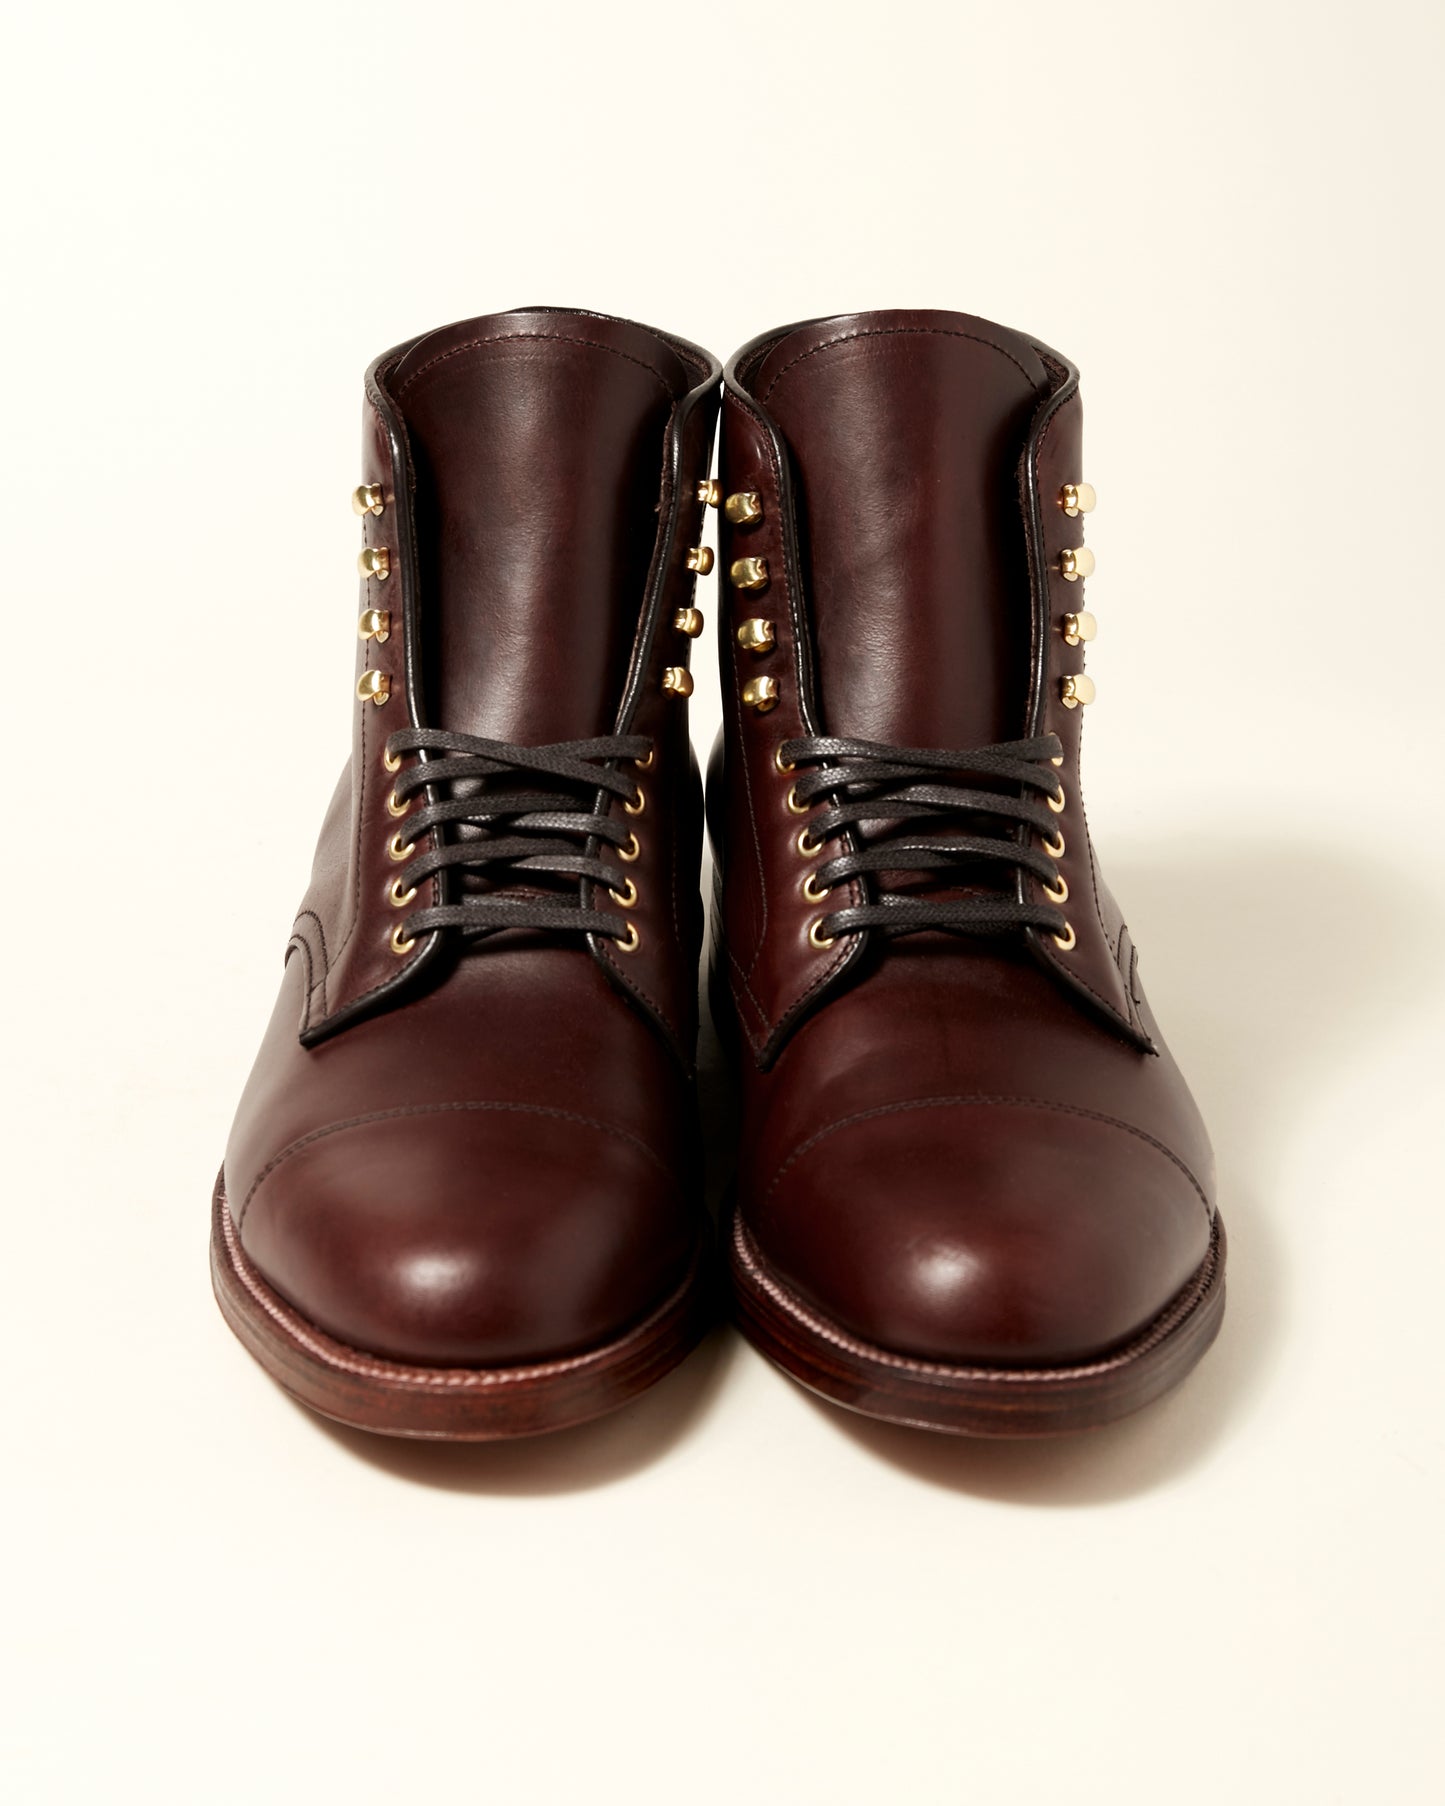 "Scout" Straight Tip Boot in Brown Chromexcel, Barrie Last